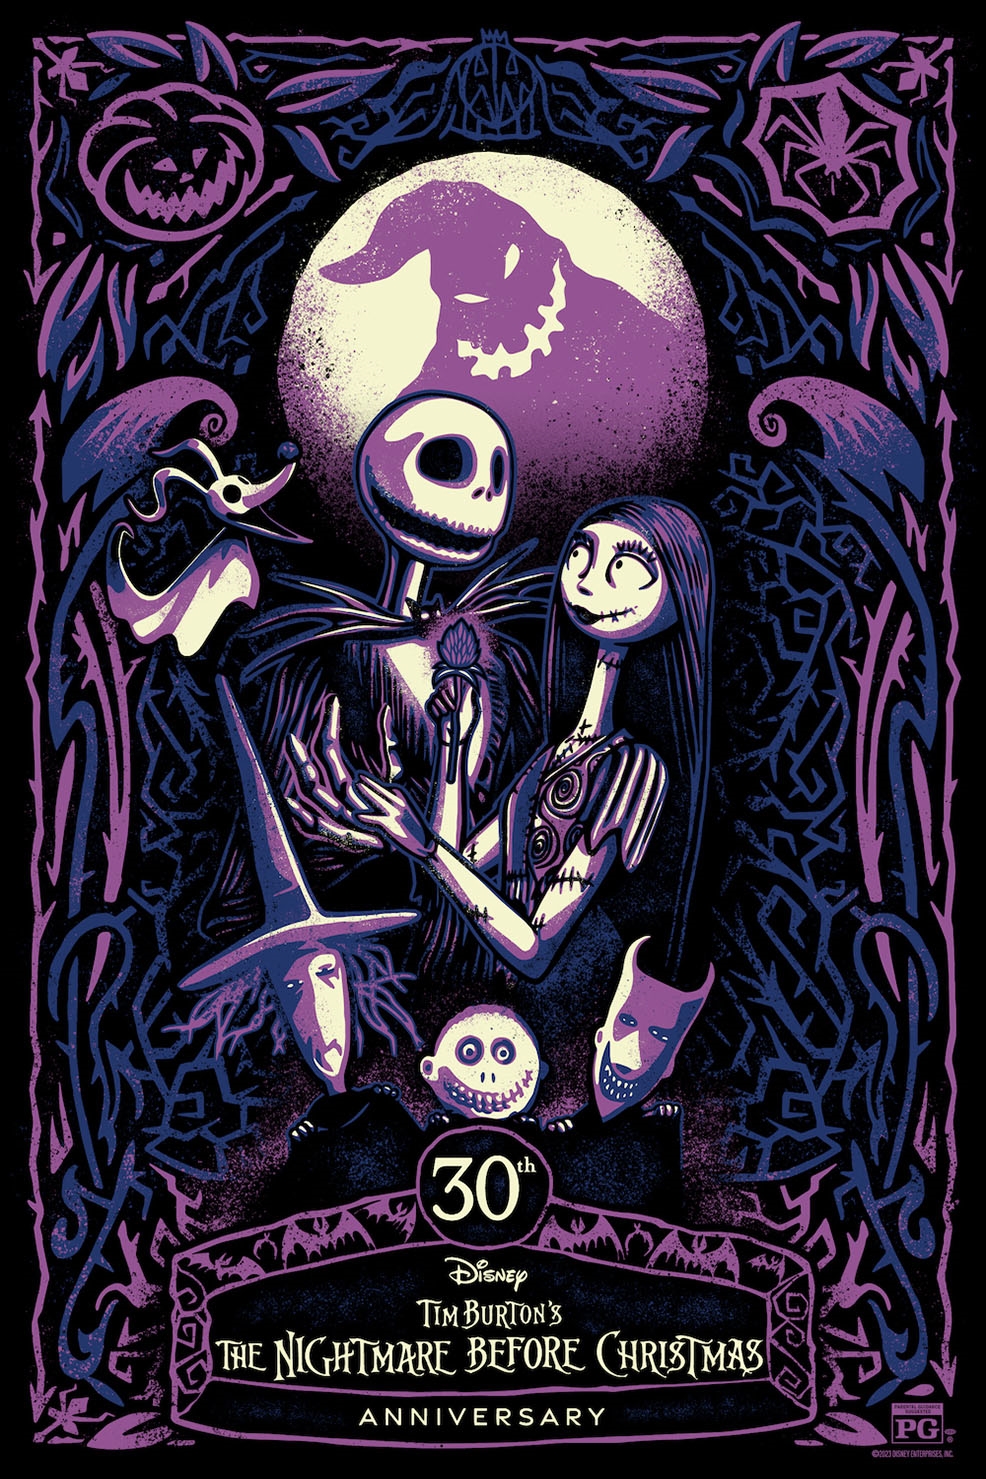 The Nightmare Before Christmas 30th Anniversary Showtimes & Tickets